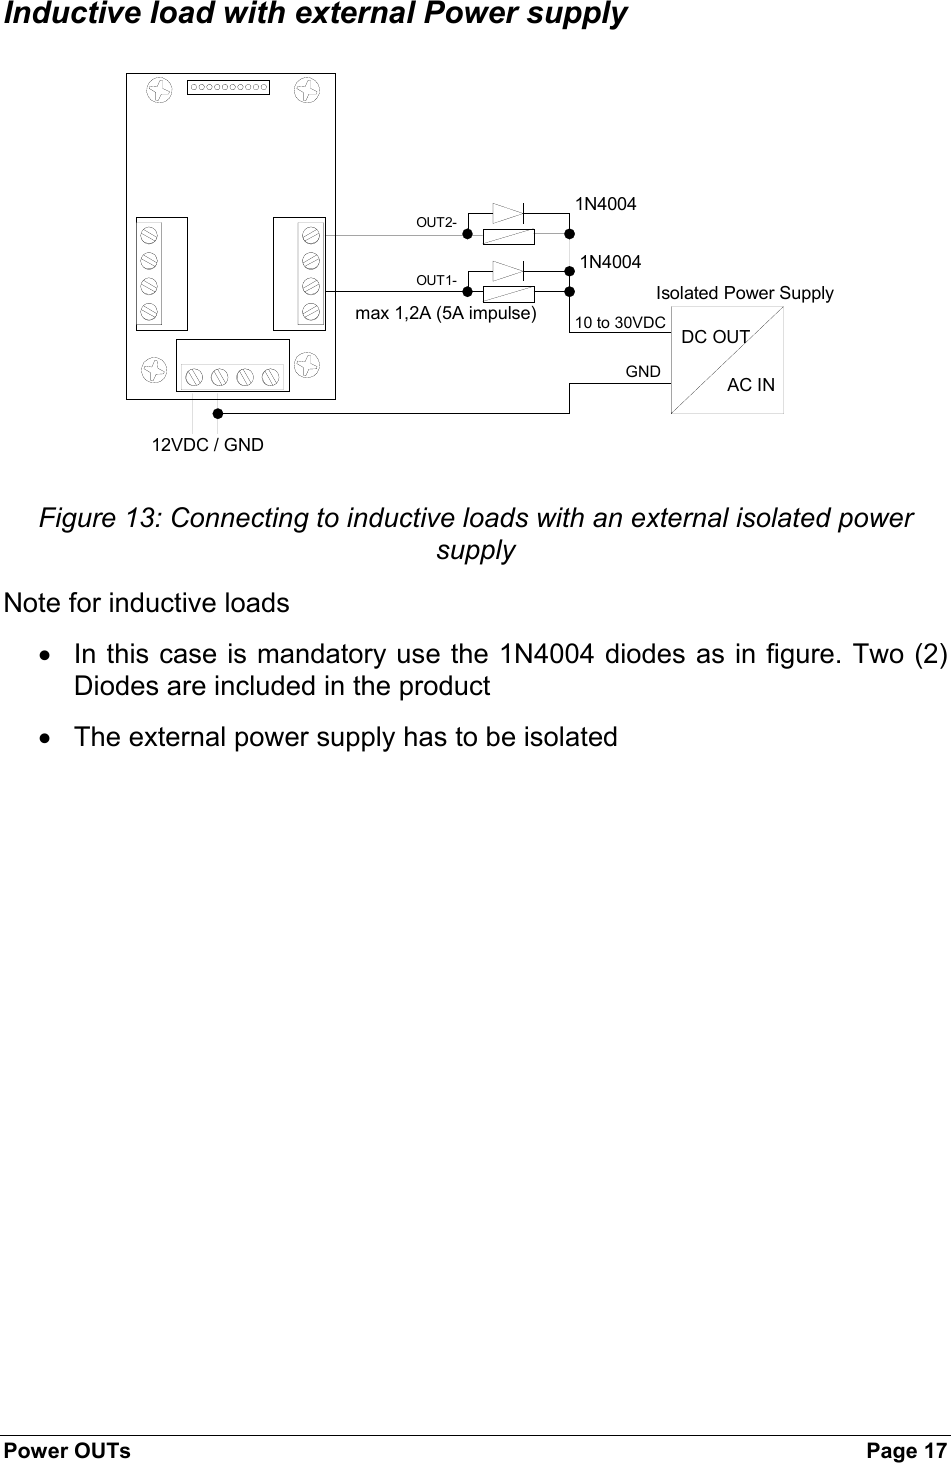 Power OUTs  Page 17 Inductive load with external Power supply AC INDC OUTOUT1-max 1,2A (5A impulse)1N400412VDC / GND10 to 30VDCOUT2-1N4004GNDIsolated Power Supply Figure 13: Connecting to inductive loads with an external isolated power supply  Note for inductive loads •  In this case is mandatory use the 1N4004 diodes as in figure. Two (2) Diodes are included in the product •  The external power supply has to be isolated  